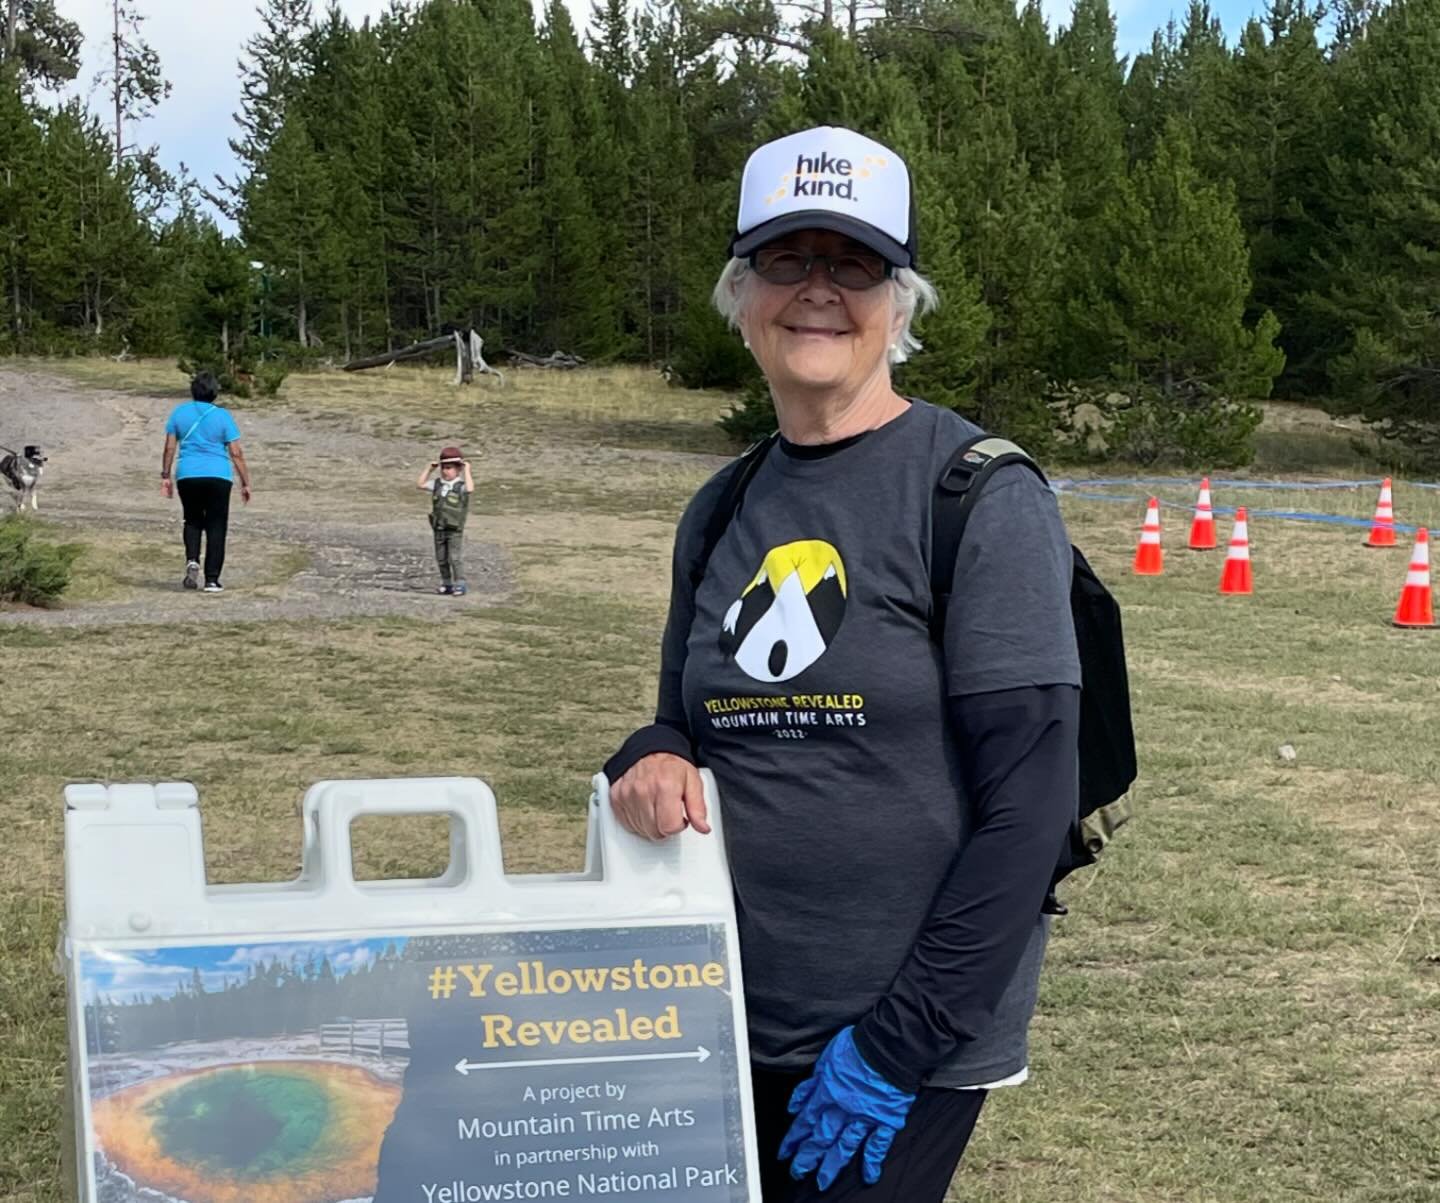 Welcome to the first &lsquo;Thursday Story Day&rsquo; where we highlight an experience someone had an MTA event. 

Thank you for your support Dayle Hayes! We can&rsquo;t wait to see you at Yellowstone Revealed this summer!

&ldquo;I am very grateful 